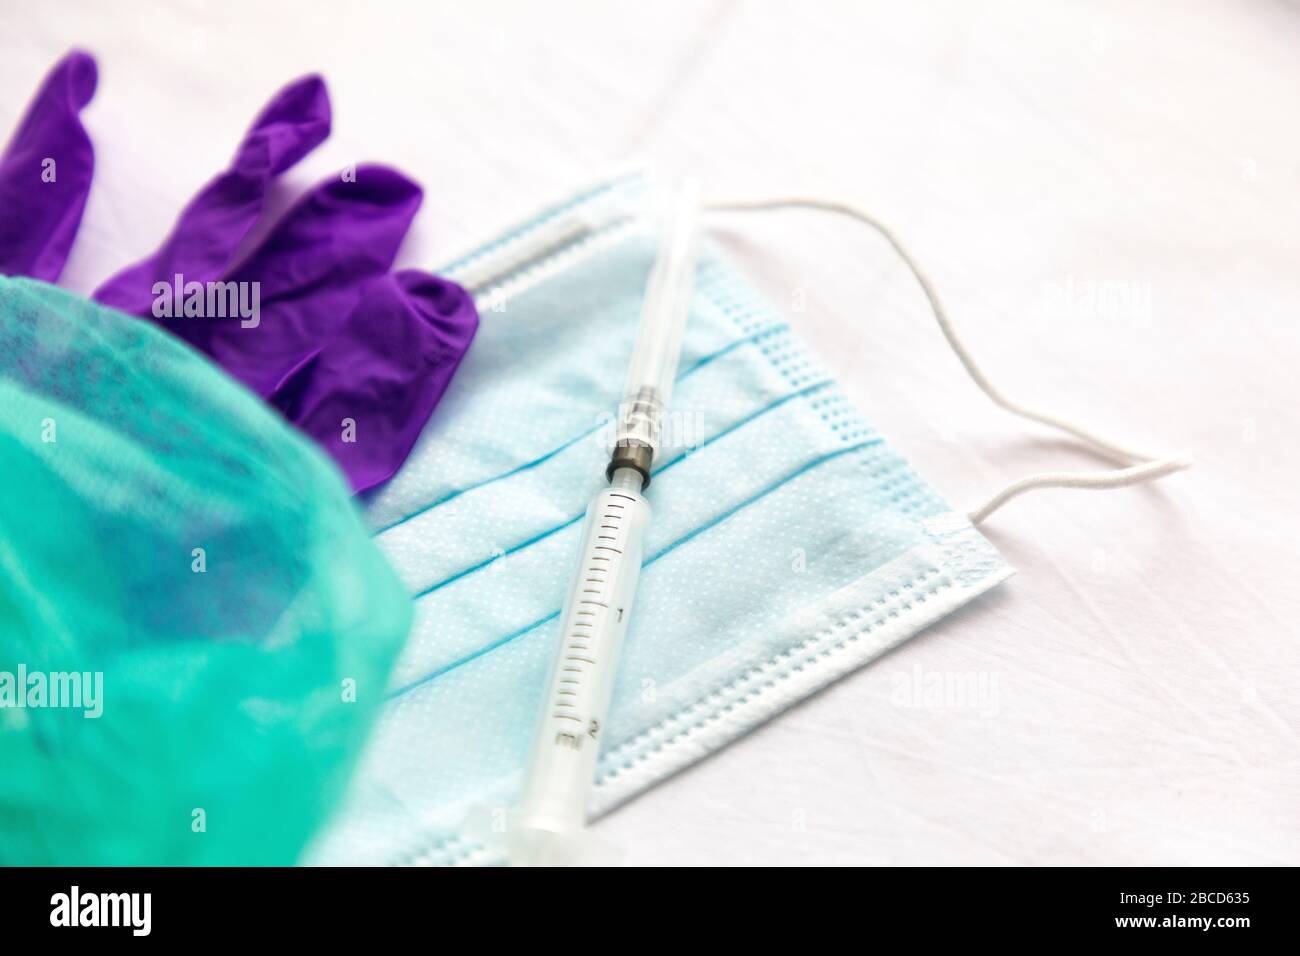 Gloves, mask and syringe with needle on a white background. Protective agents against viruses, bacteria. Stock Photo